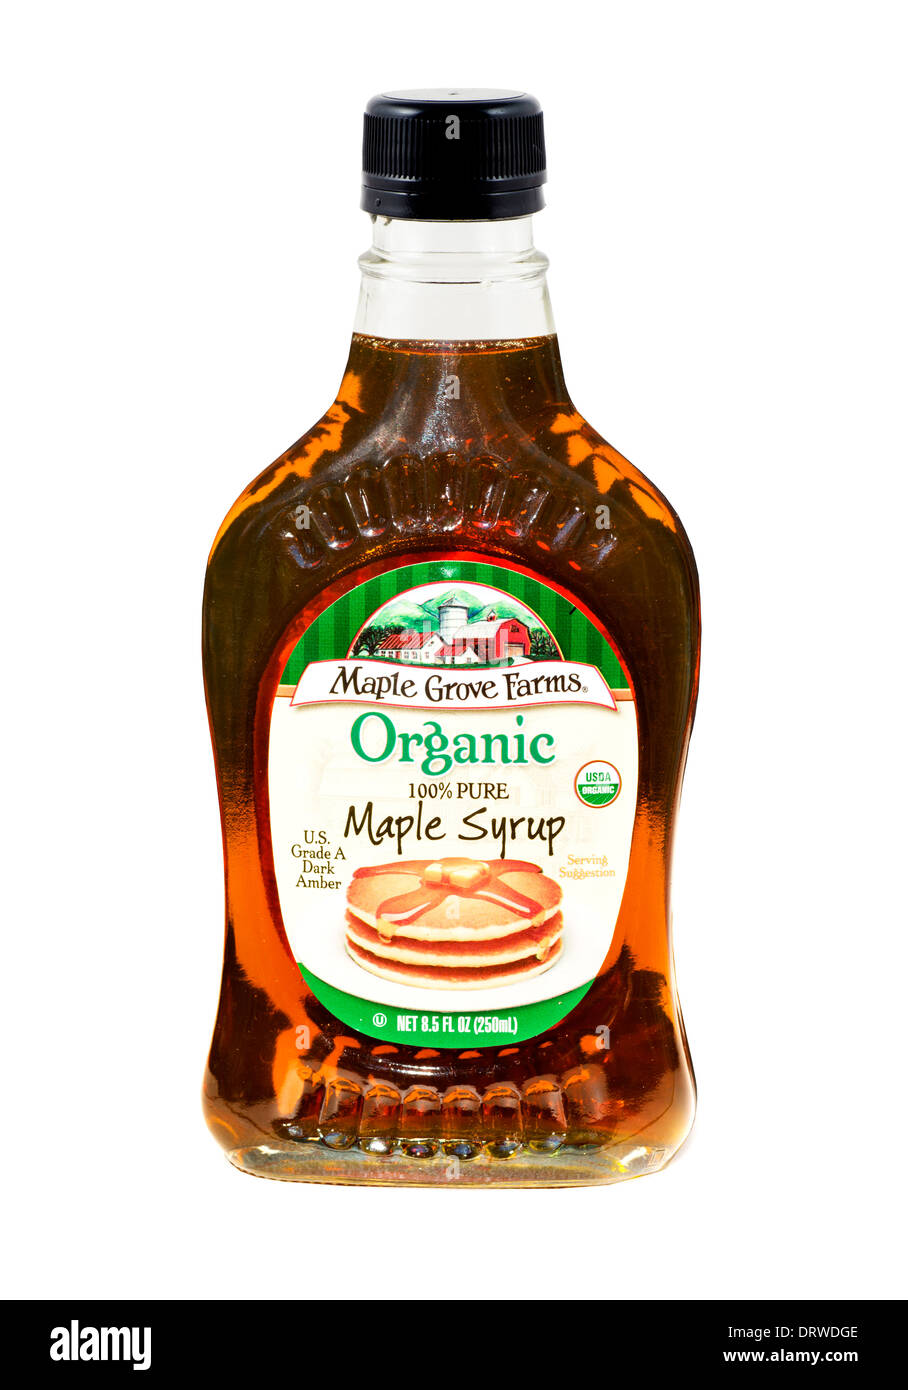 Bottle of Maple Grove Farms 100% Organic Maple Syrup, USA Stock Photo